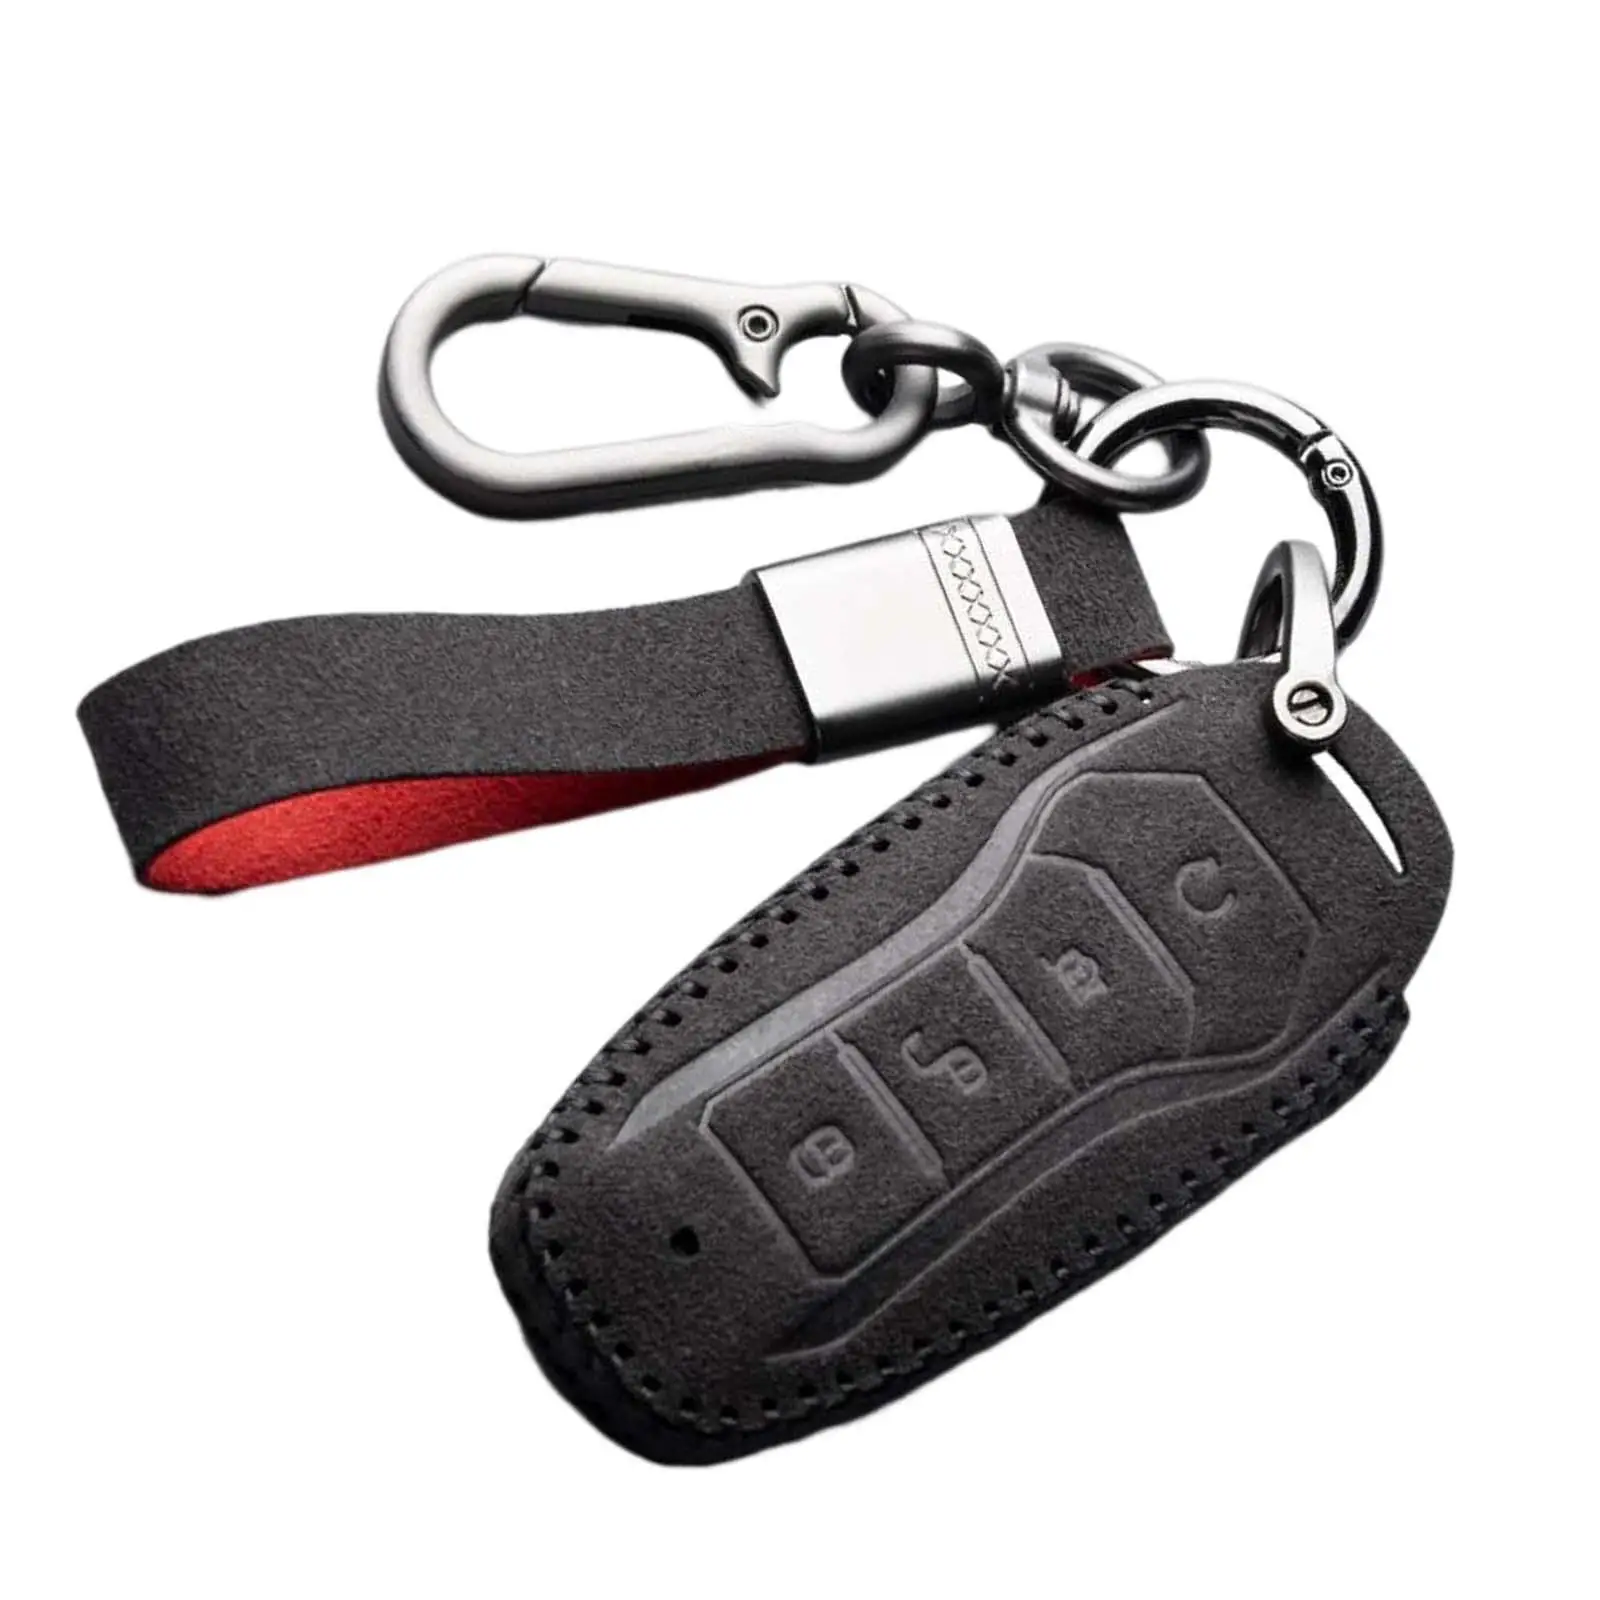 Car Remote Key Case Cover Fob PU Fashion Men Women Remote Control Cars Shell protected Holder Shell for Byd Song Plus Dmi